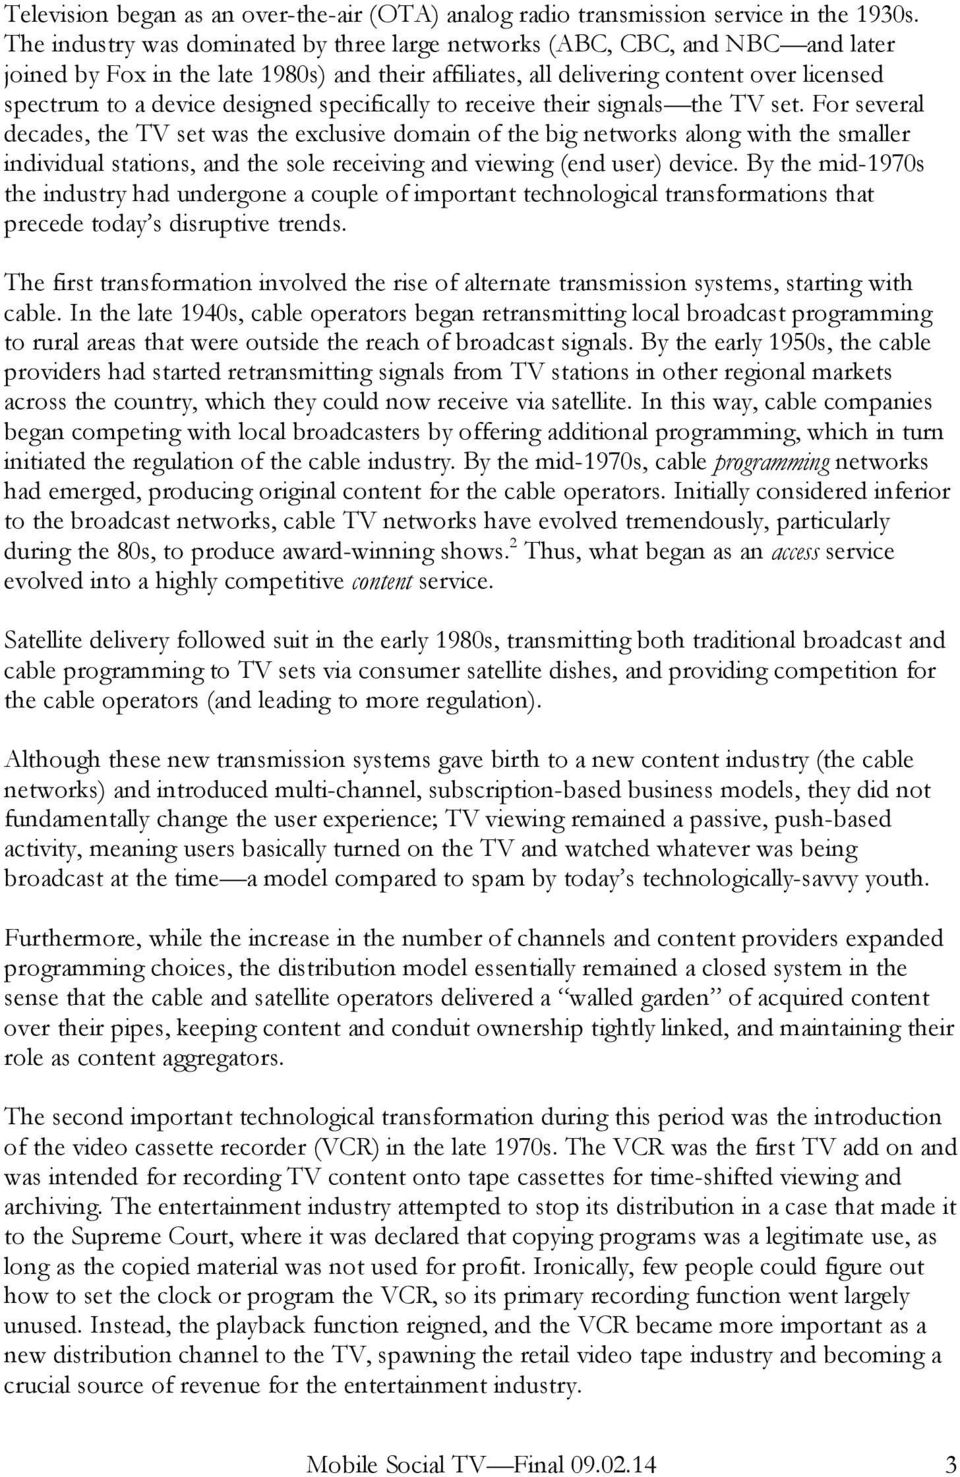 Short essay on the Impact of Cable TV on us